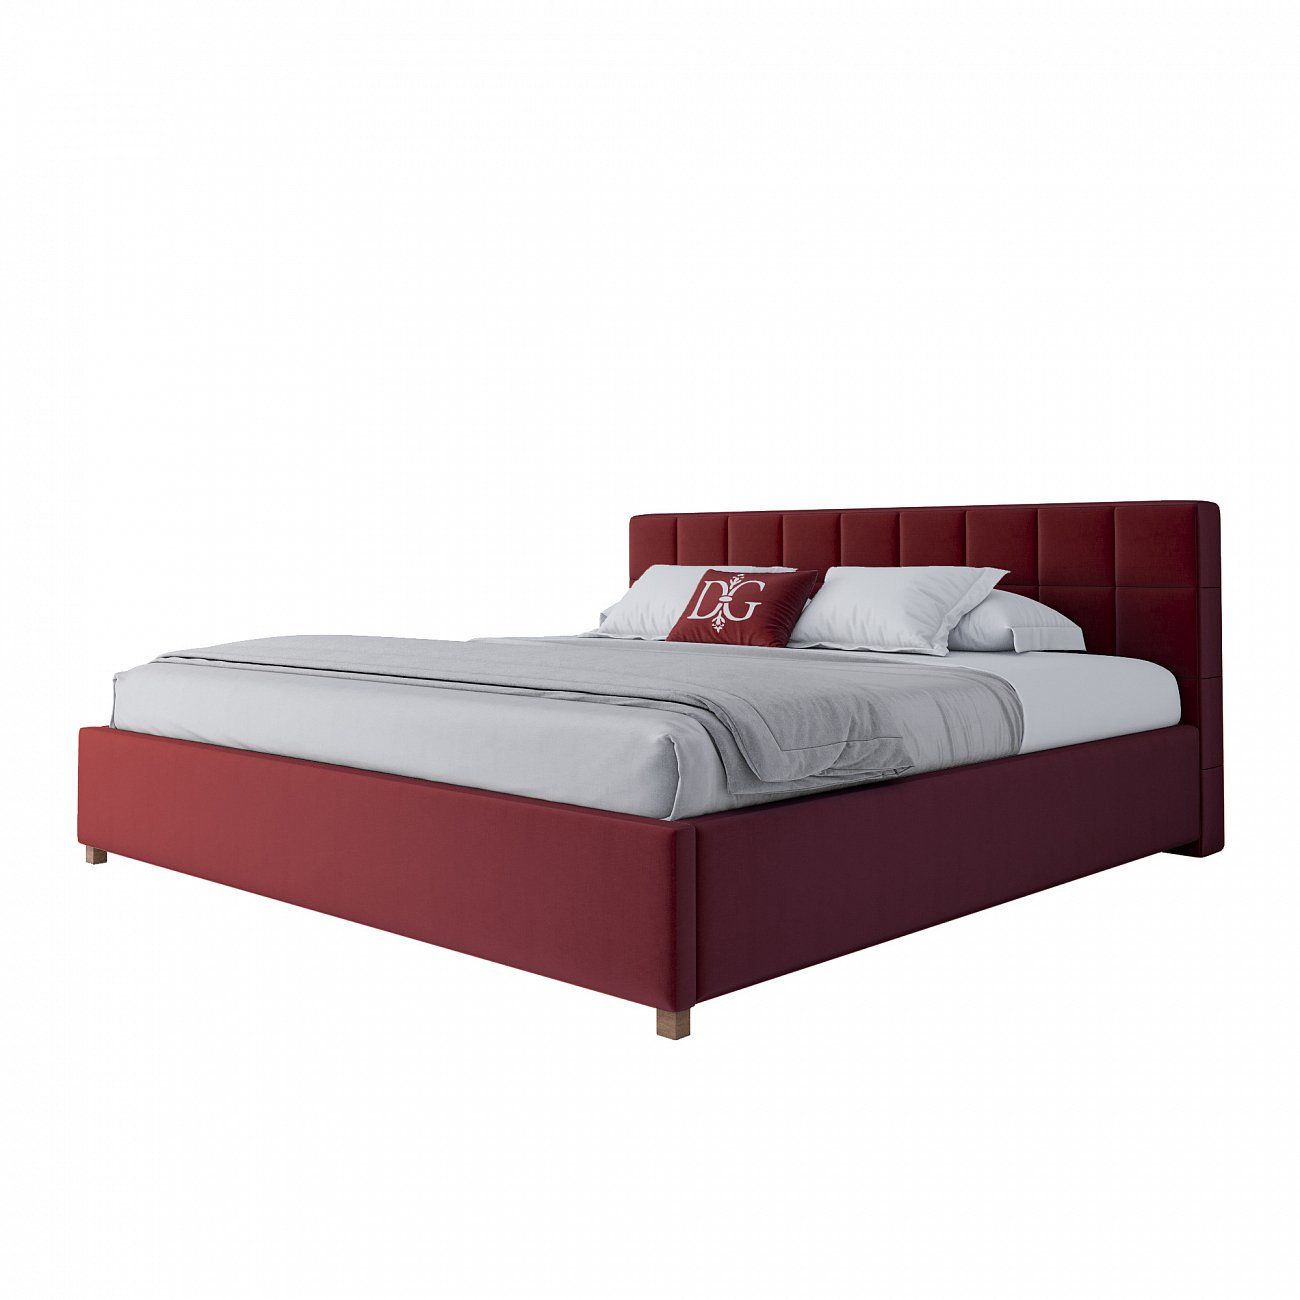 Large bed 200x200 Wales red